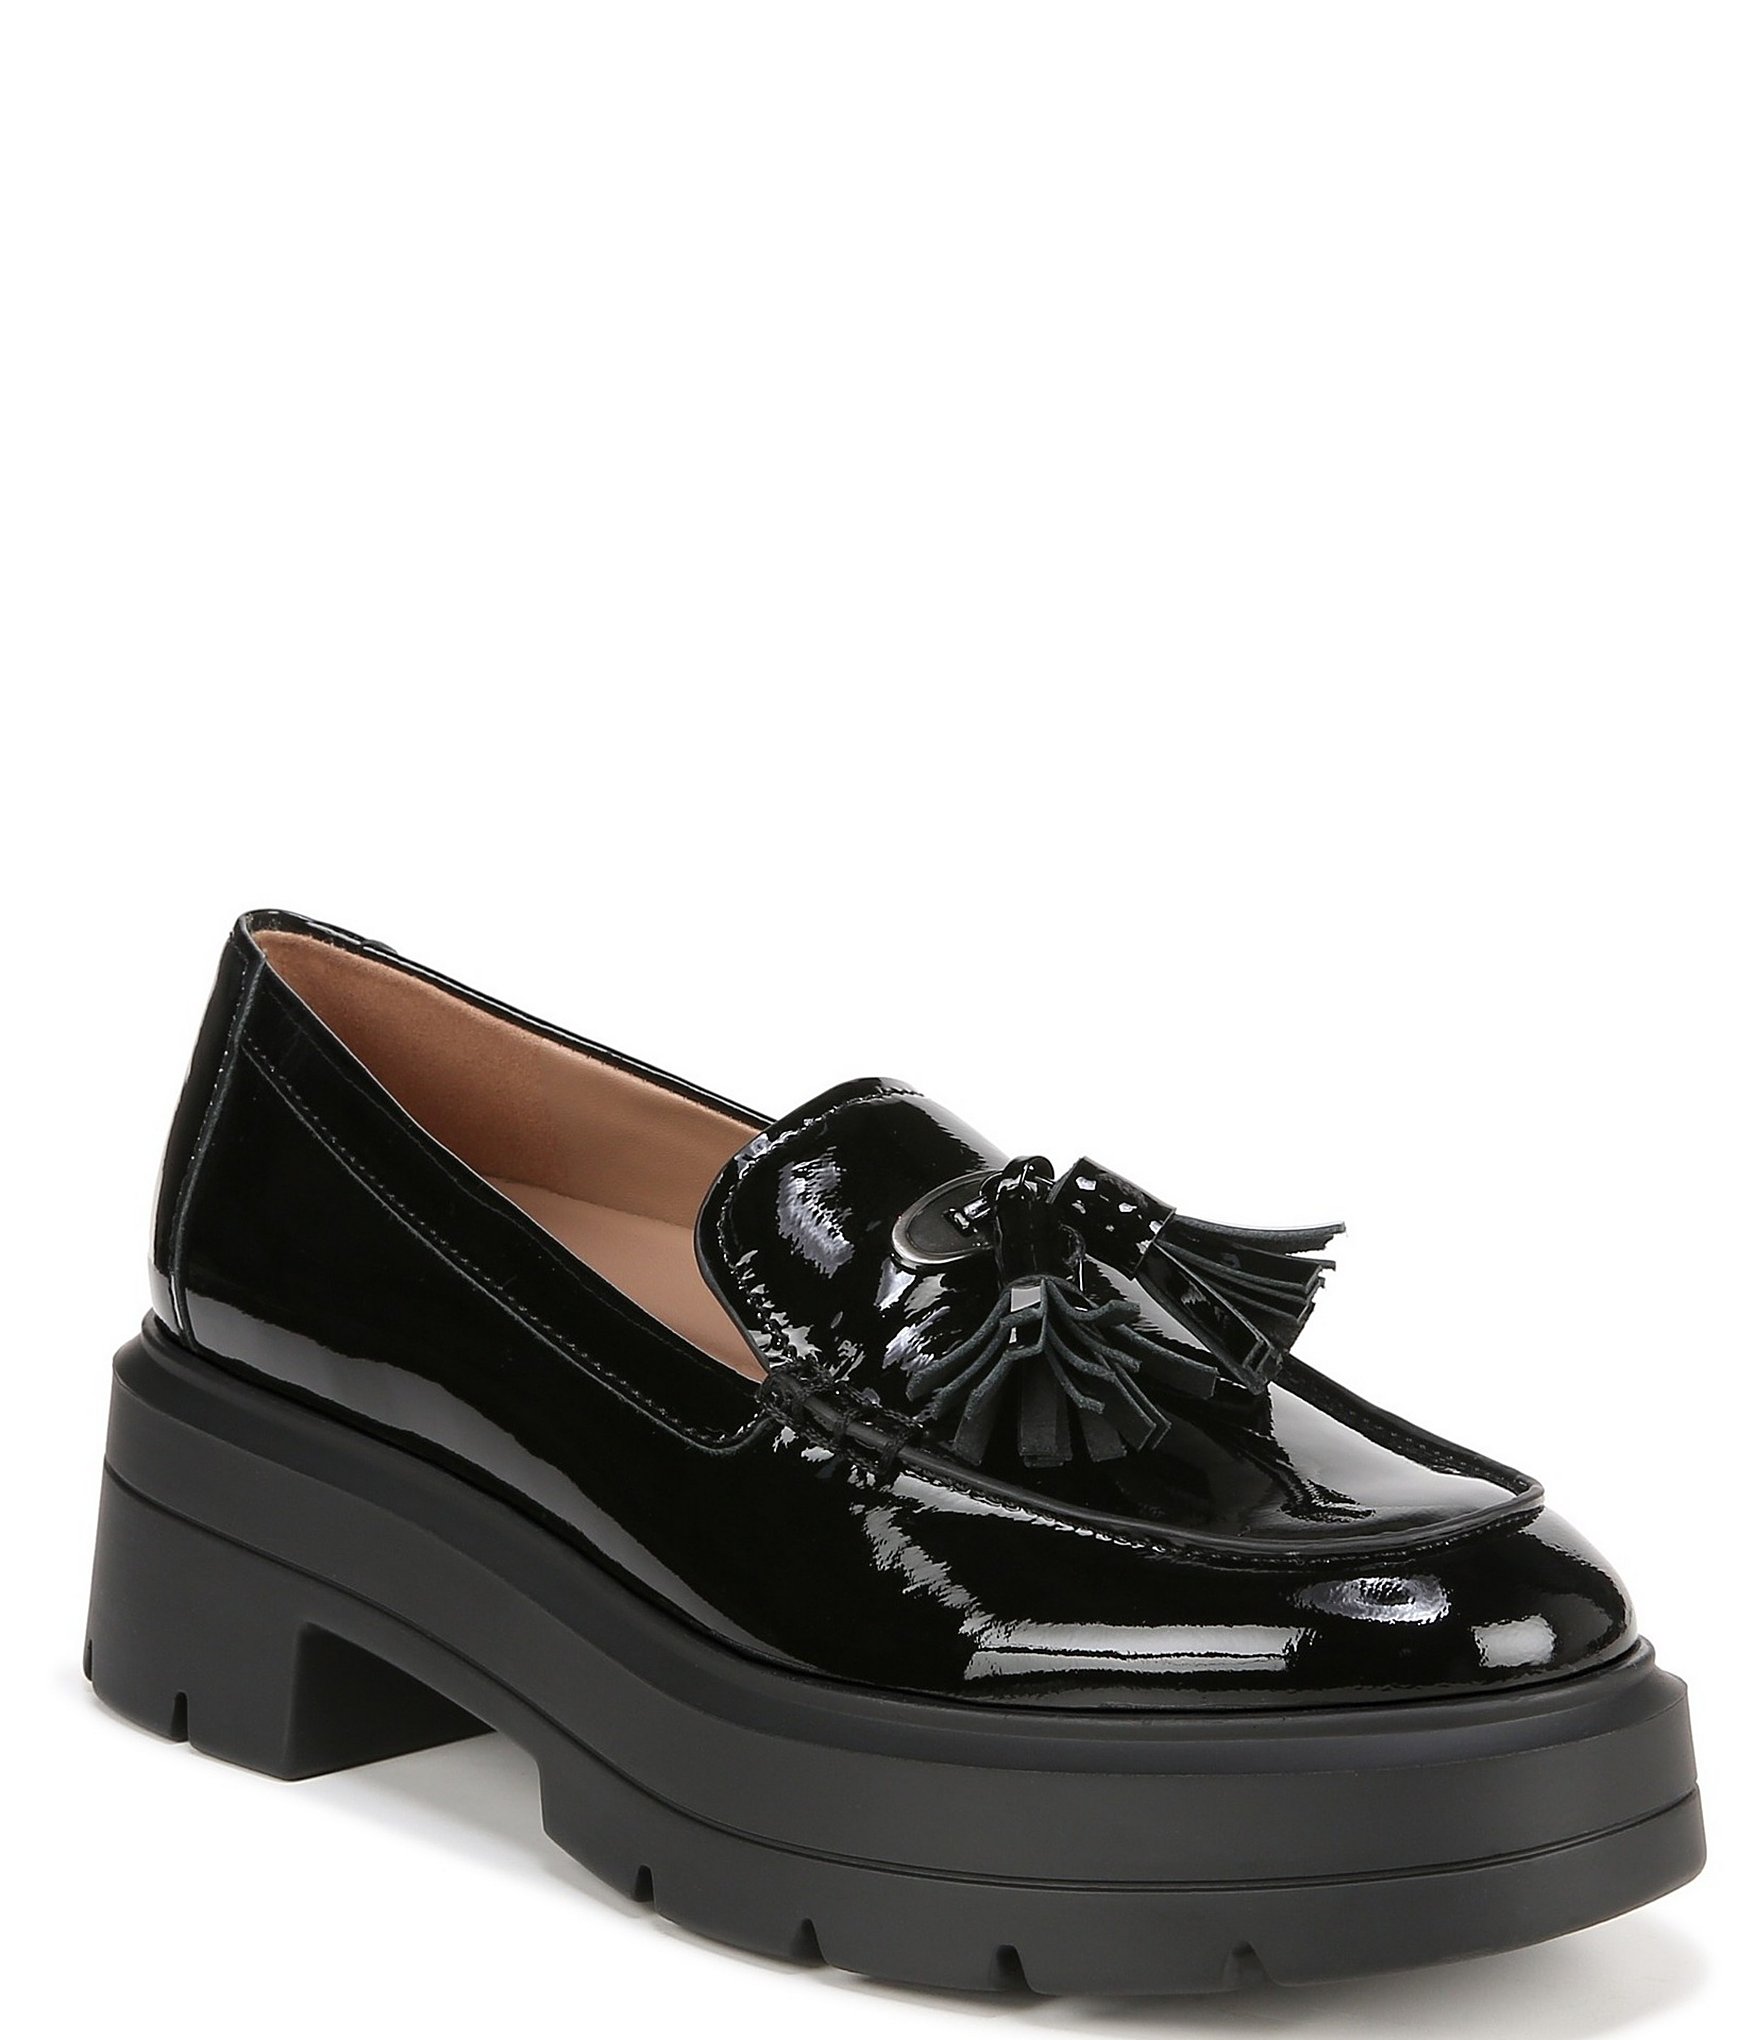 Naturalizer Nieves Lug Sole Loafers - Black Patent Leather - Size 8M